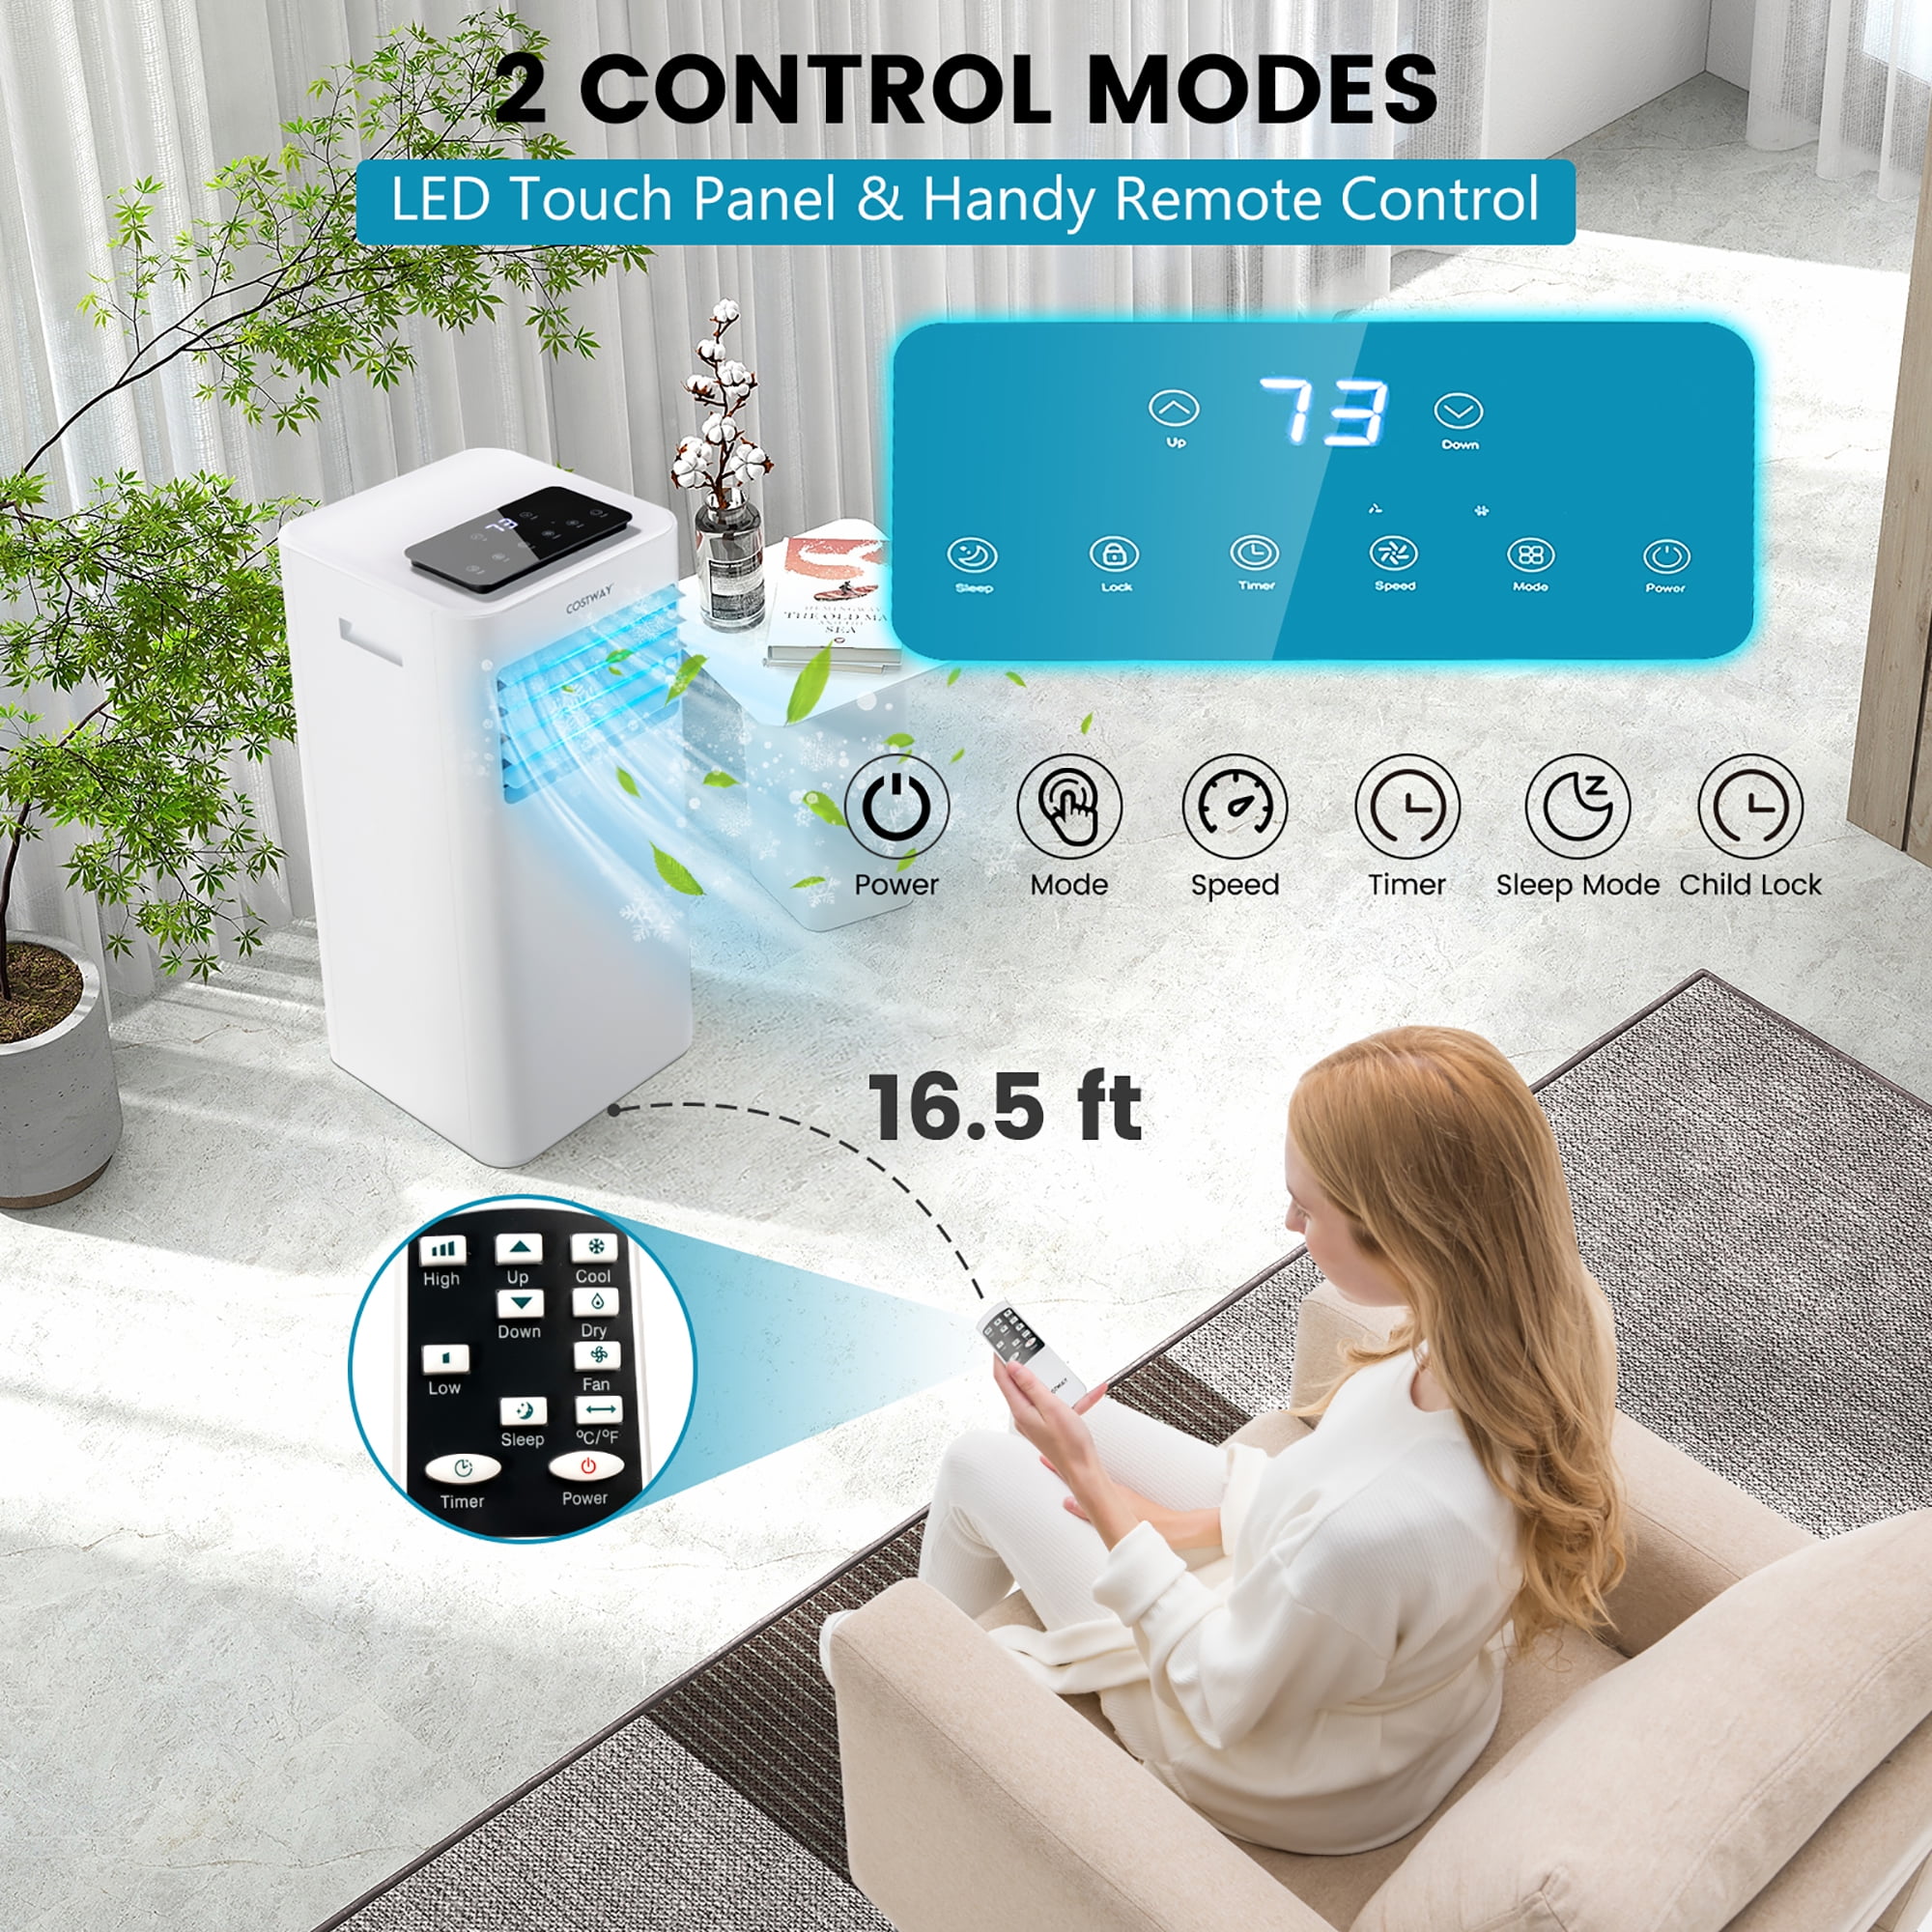  COSTWAY Portable Air Conditioners, 8000 BTU Air Conditioner  Unit spaces up to 230 Sq.Ft with Remote Control Dehumidifier Function  Window Wall Mount, 4 Caster Wheel, Sleep Mode and 2 Fan Speed 